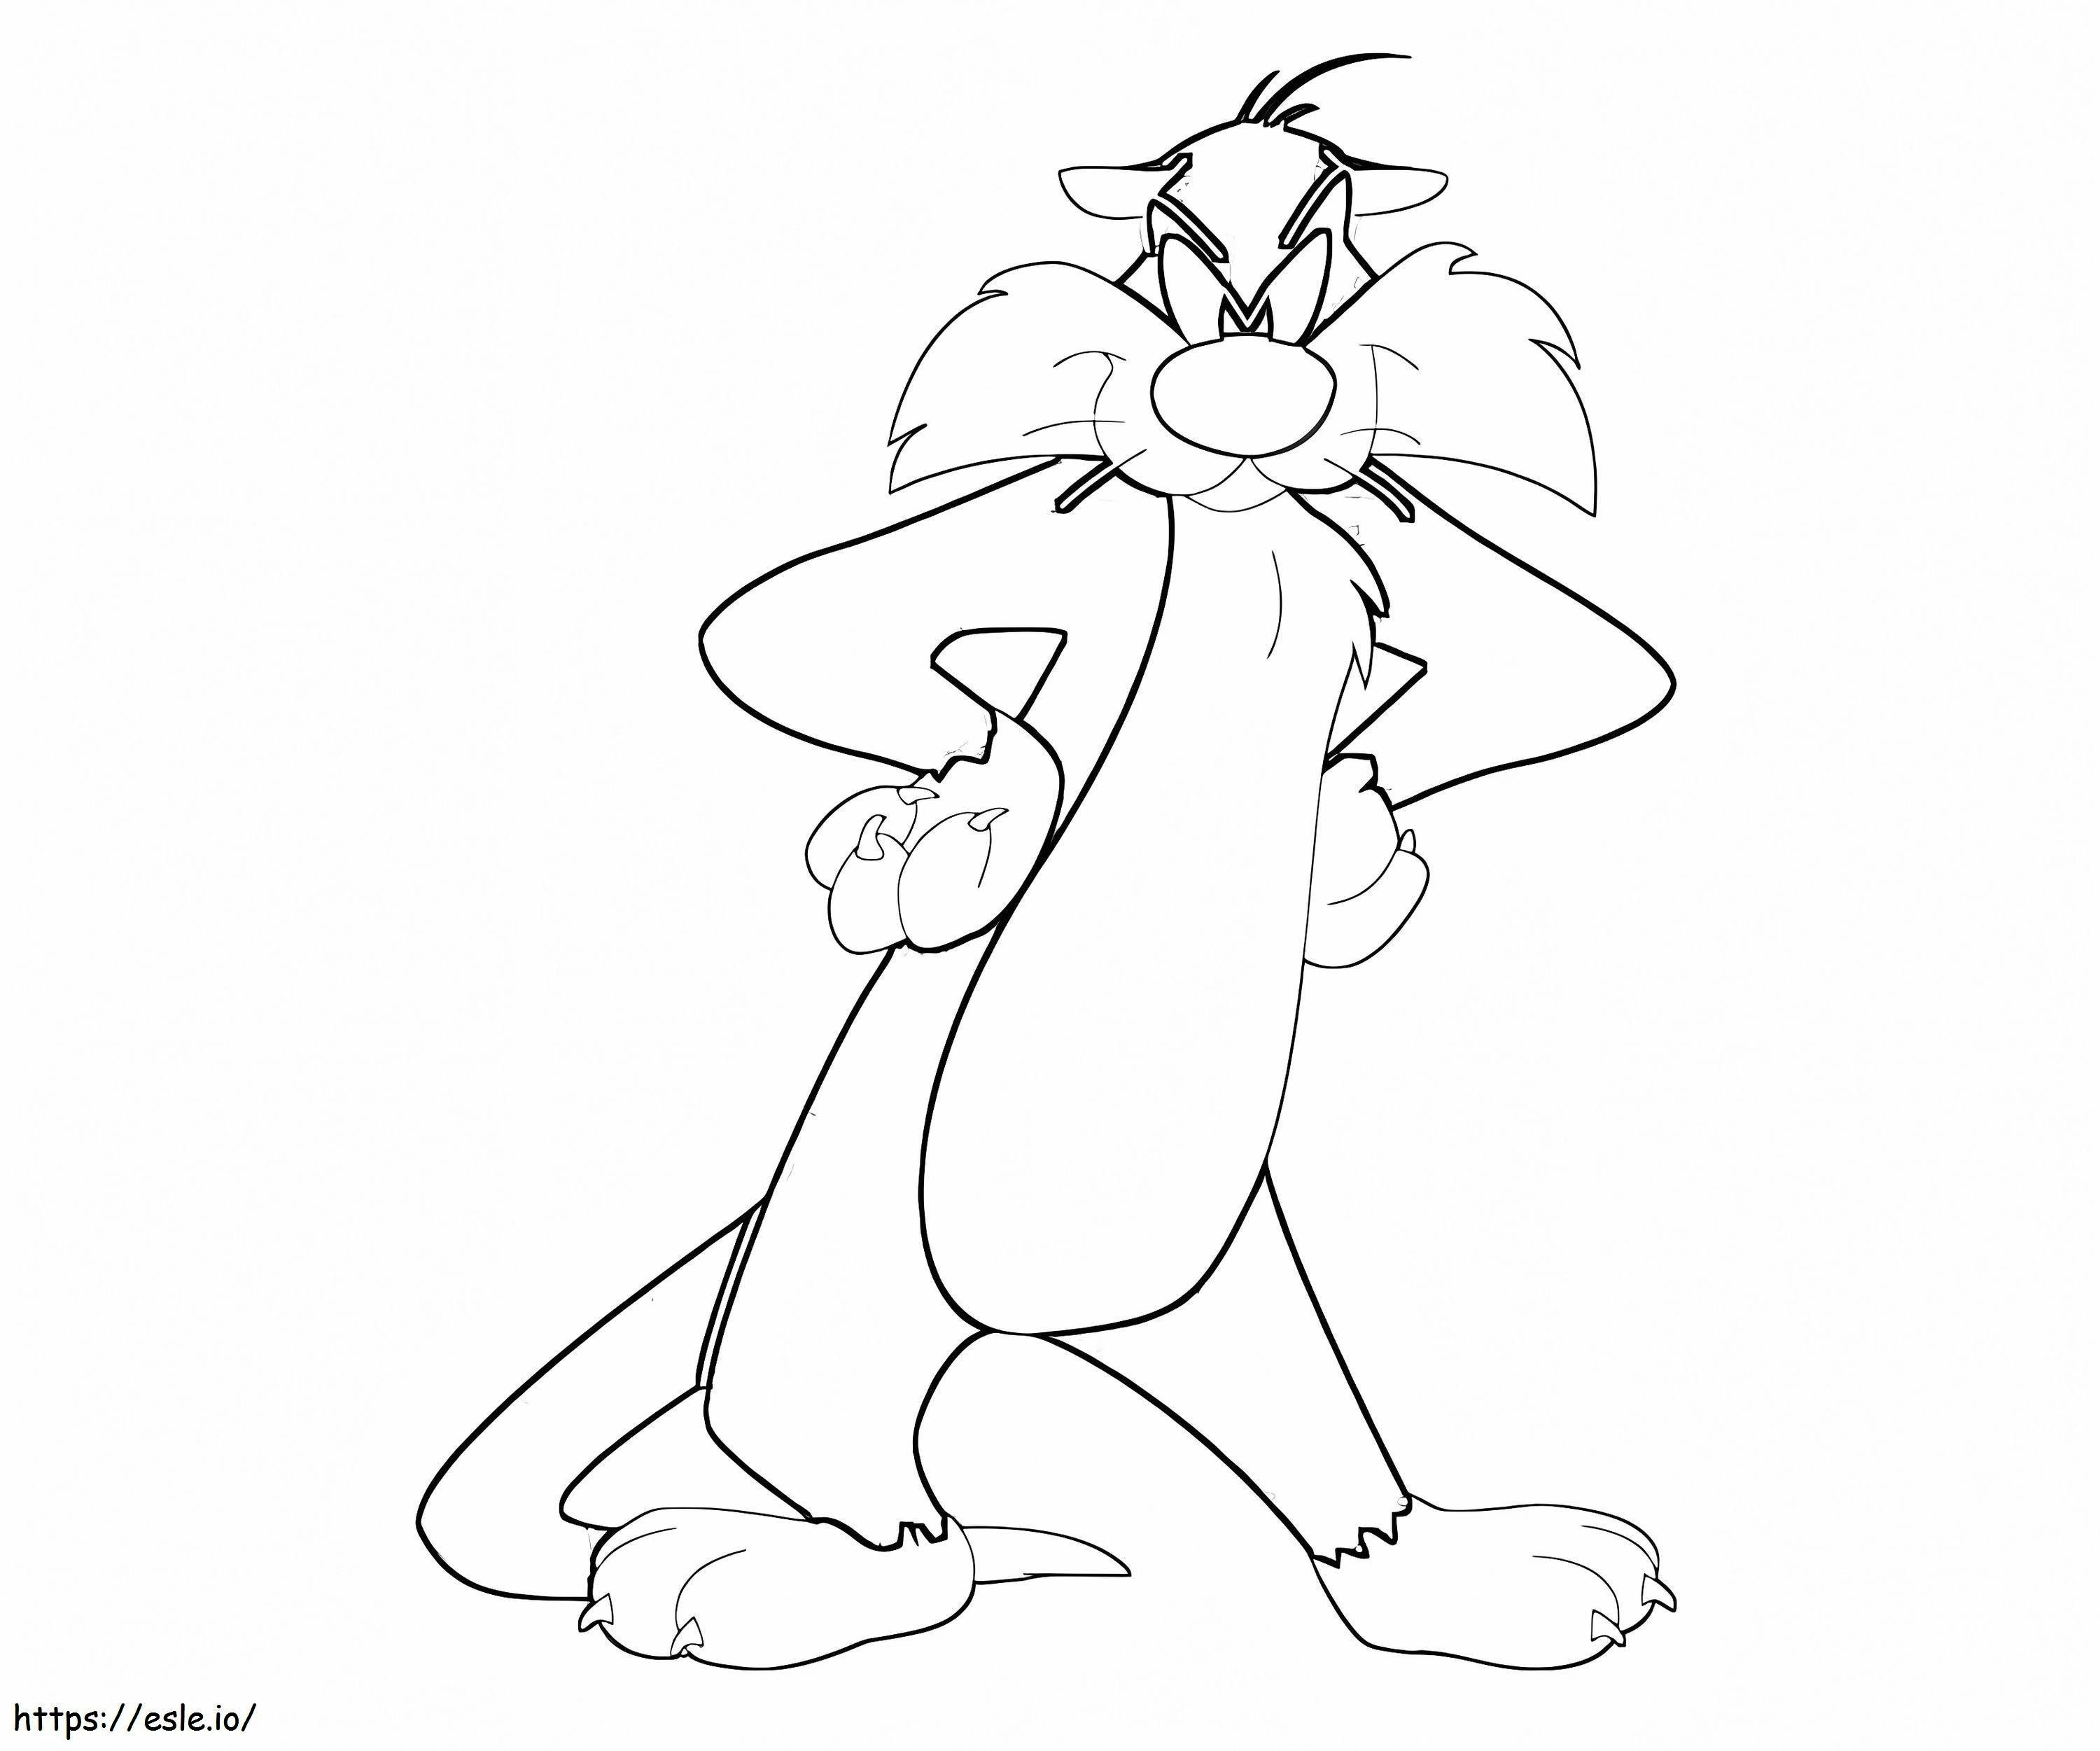 Sylvester Cat coloring page